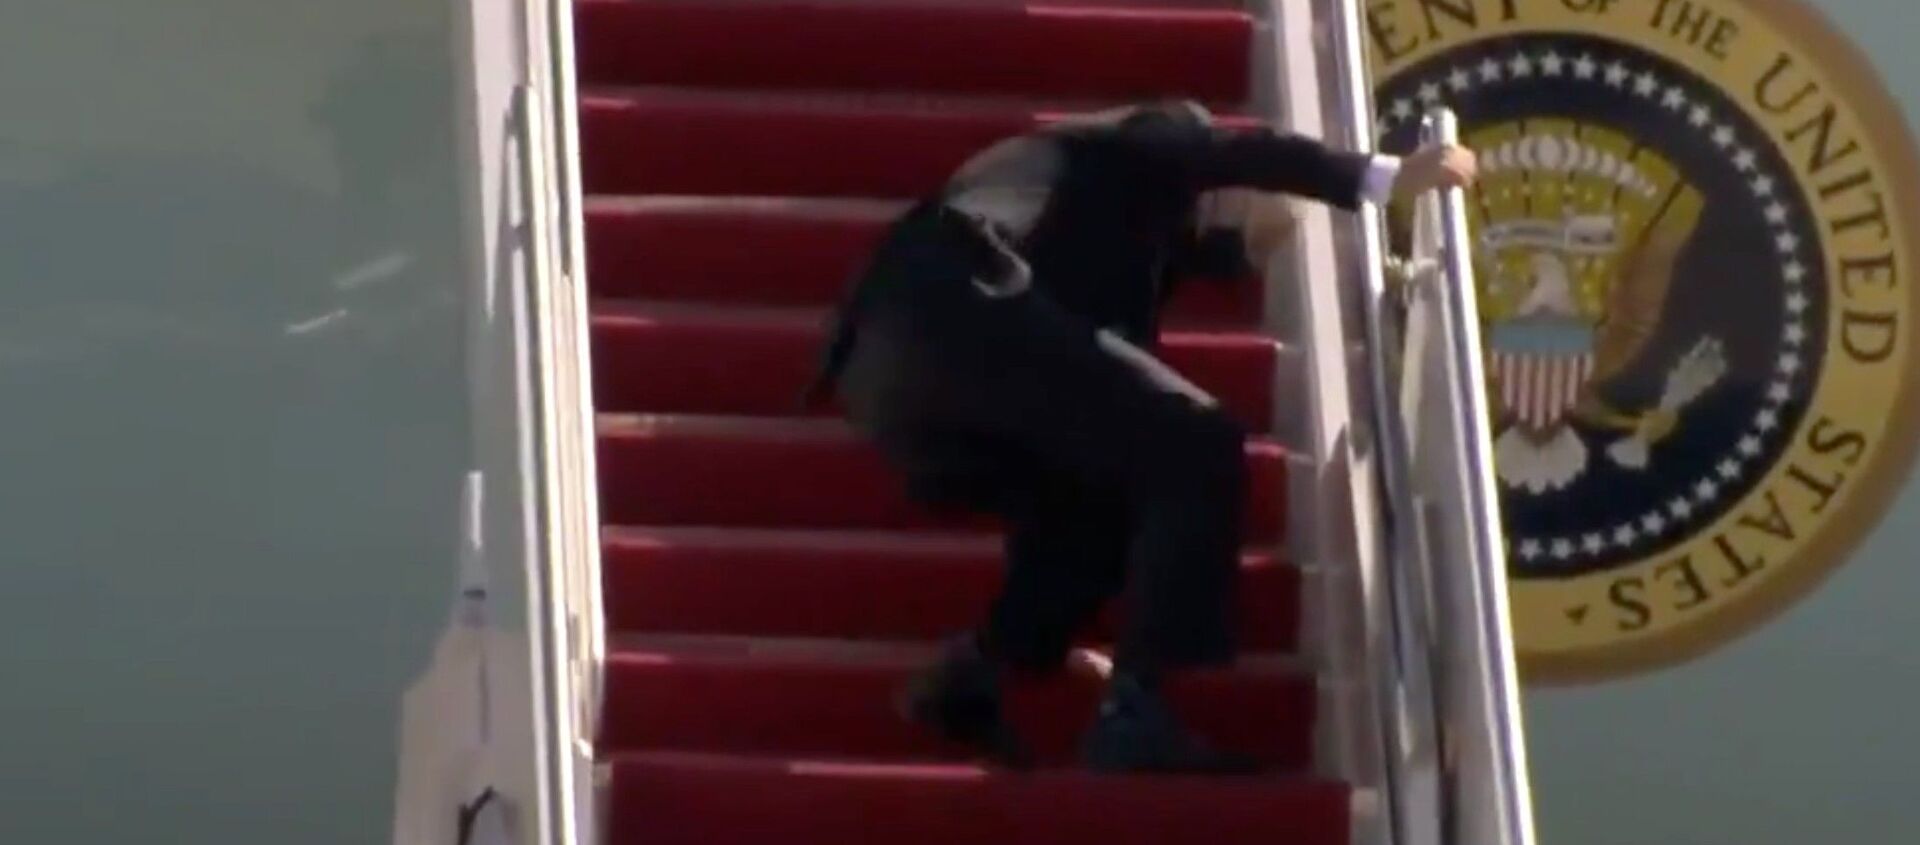 Screenshot captures the moment that US President Joe Biden caught himself after stumbling three times while ascending the airstairs to board Air Force Once. - Sputnik International, 1920, 21.03.2021